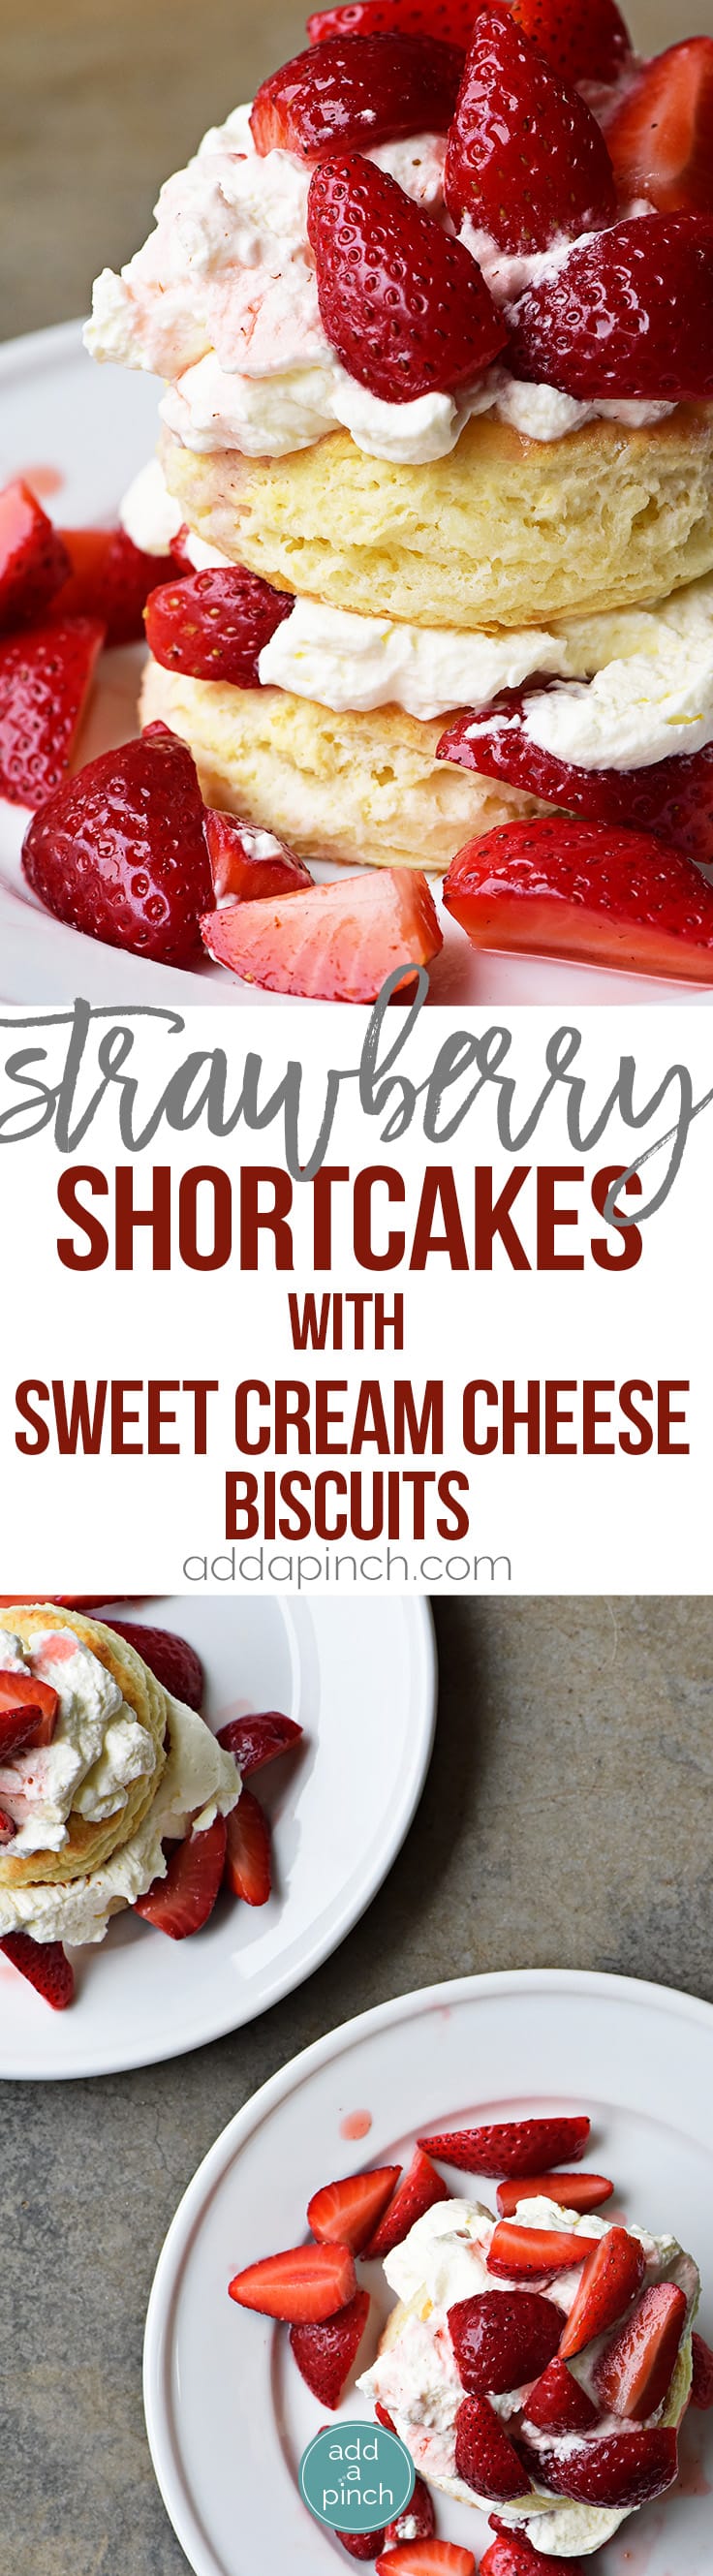 Strawberry Shortcake with Sweet Cream Cheese Biscuits Recipe - Strawberry Shortcakes with Sweet Cream Cheese Biscuits make a simple, yet scrumptious dessert recipe perfect for spring and summer! // addapinch.com 